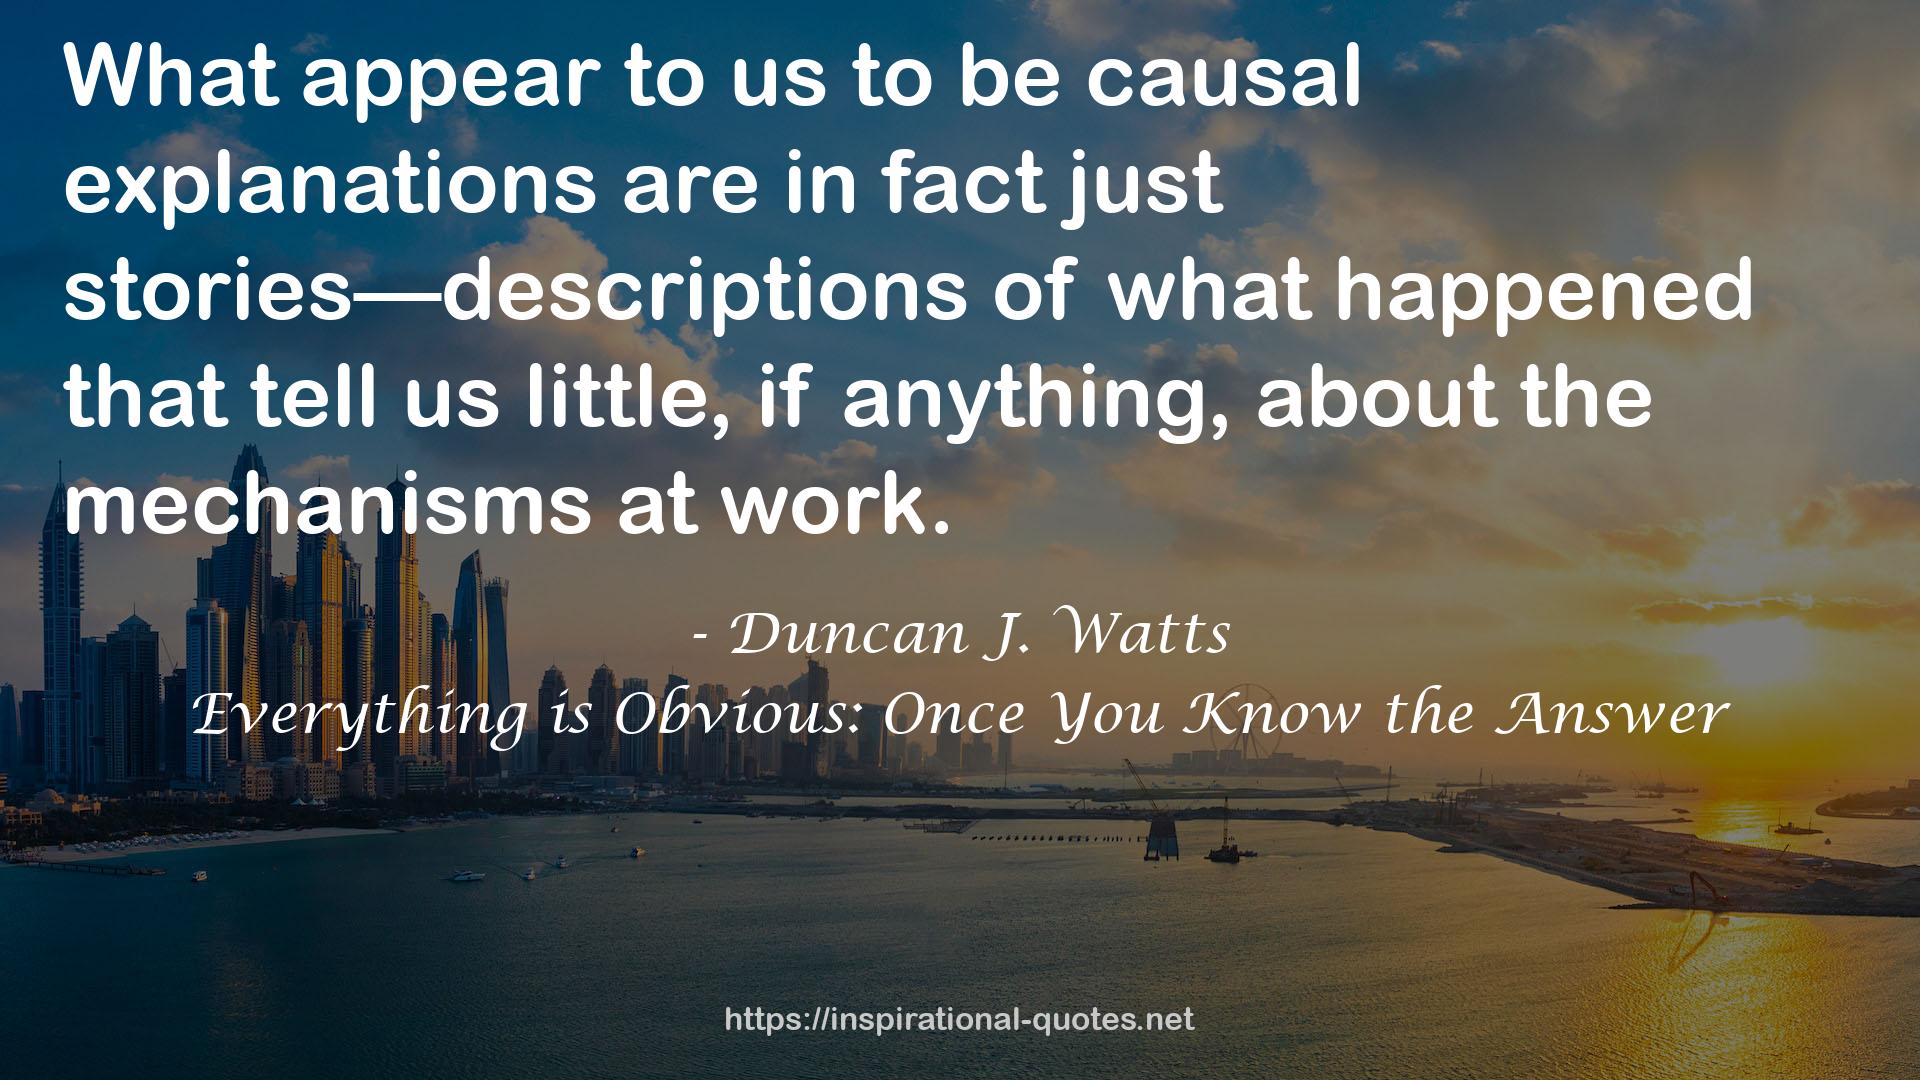 Everything is Obvious: Once You Know the Answer QUOTES